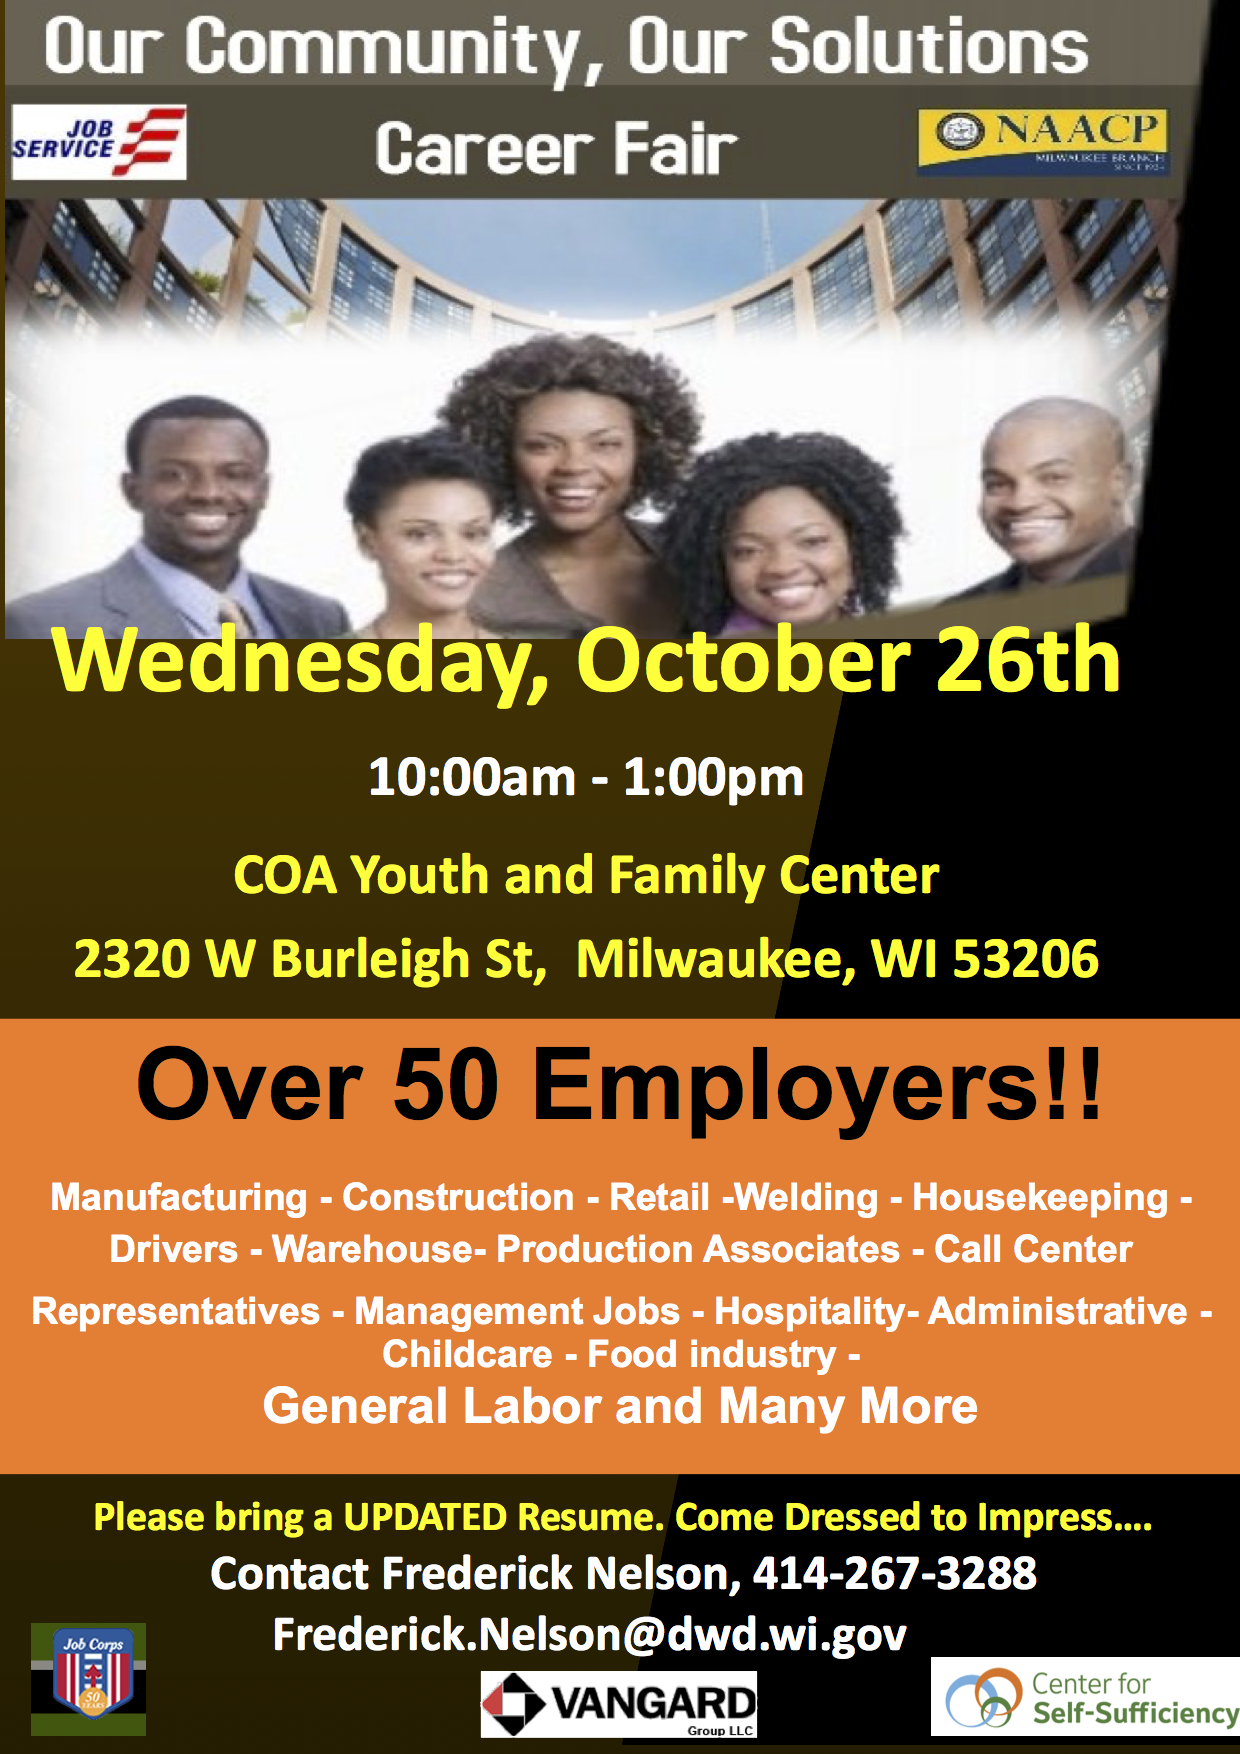 Our Community, Our Solutions Career Fair